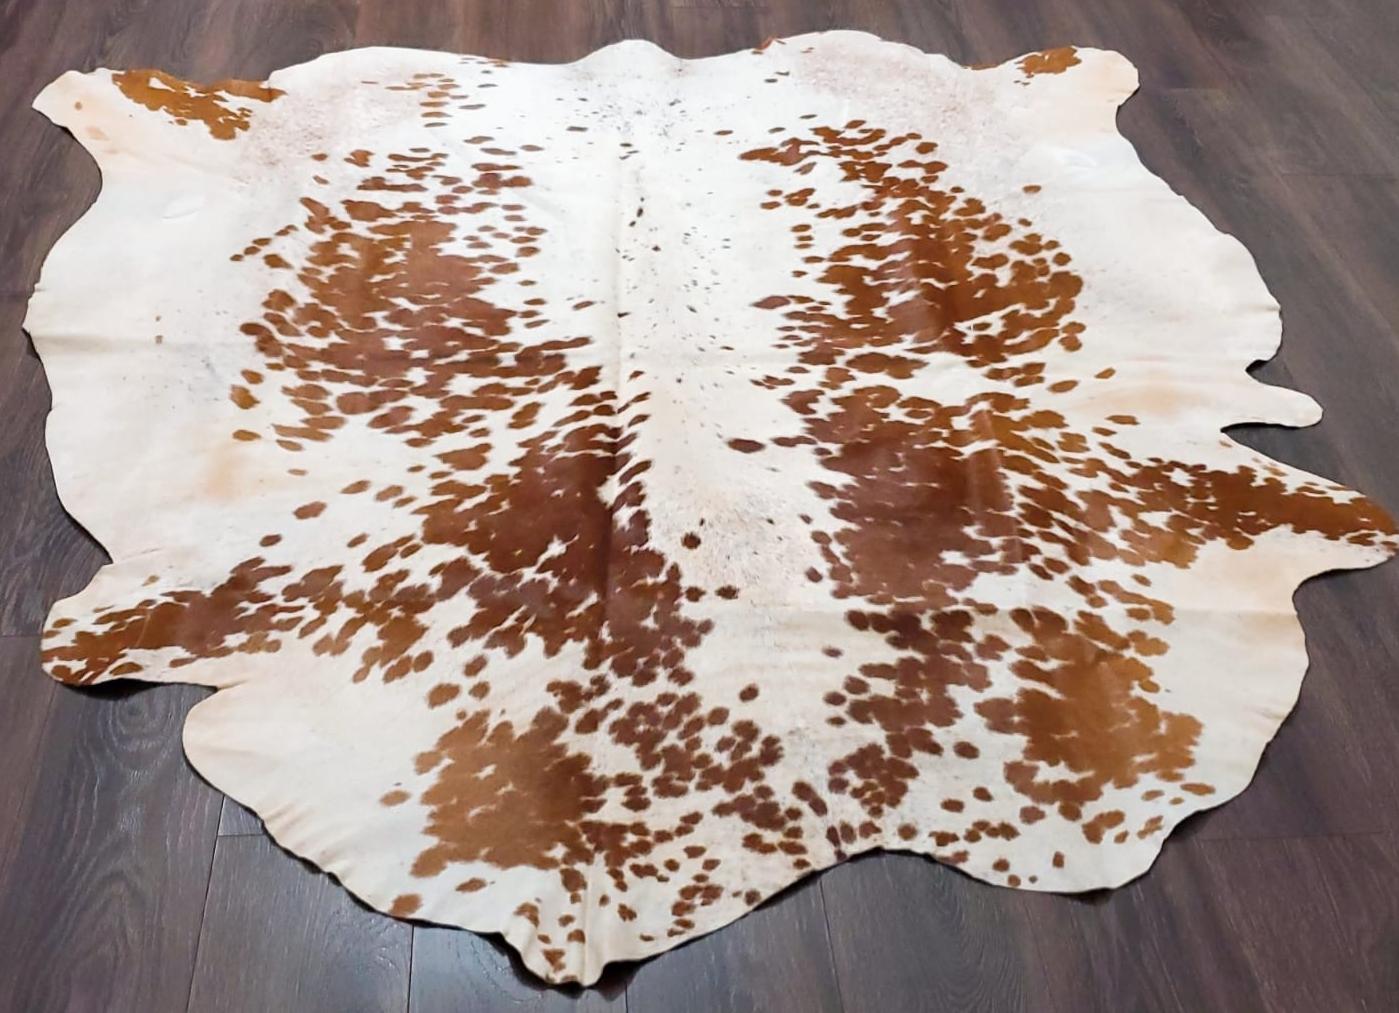 Premium Quality Real Tricolor Cowhide Rug Leather/ Cow Skin Area Rug Hair on Leather Hide 6 ft X 6 ft - 36 x 36 sq.ft Approx. (Tricolor 24)